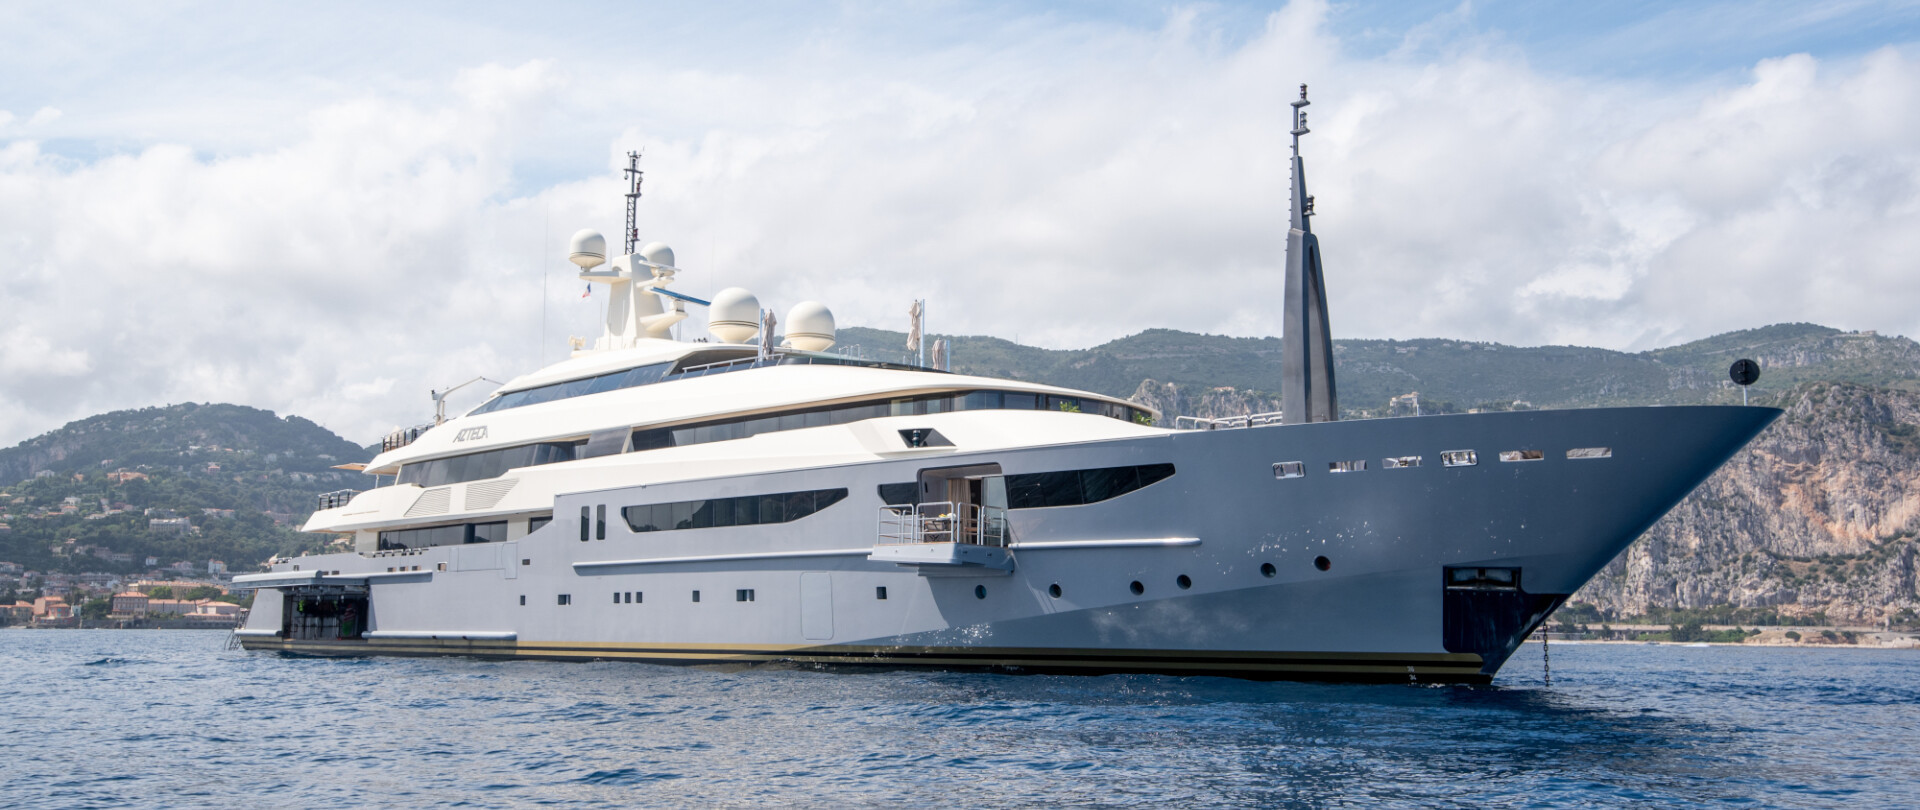 Azteca becomes the largest yacht ever to accept Bitcoin as payment